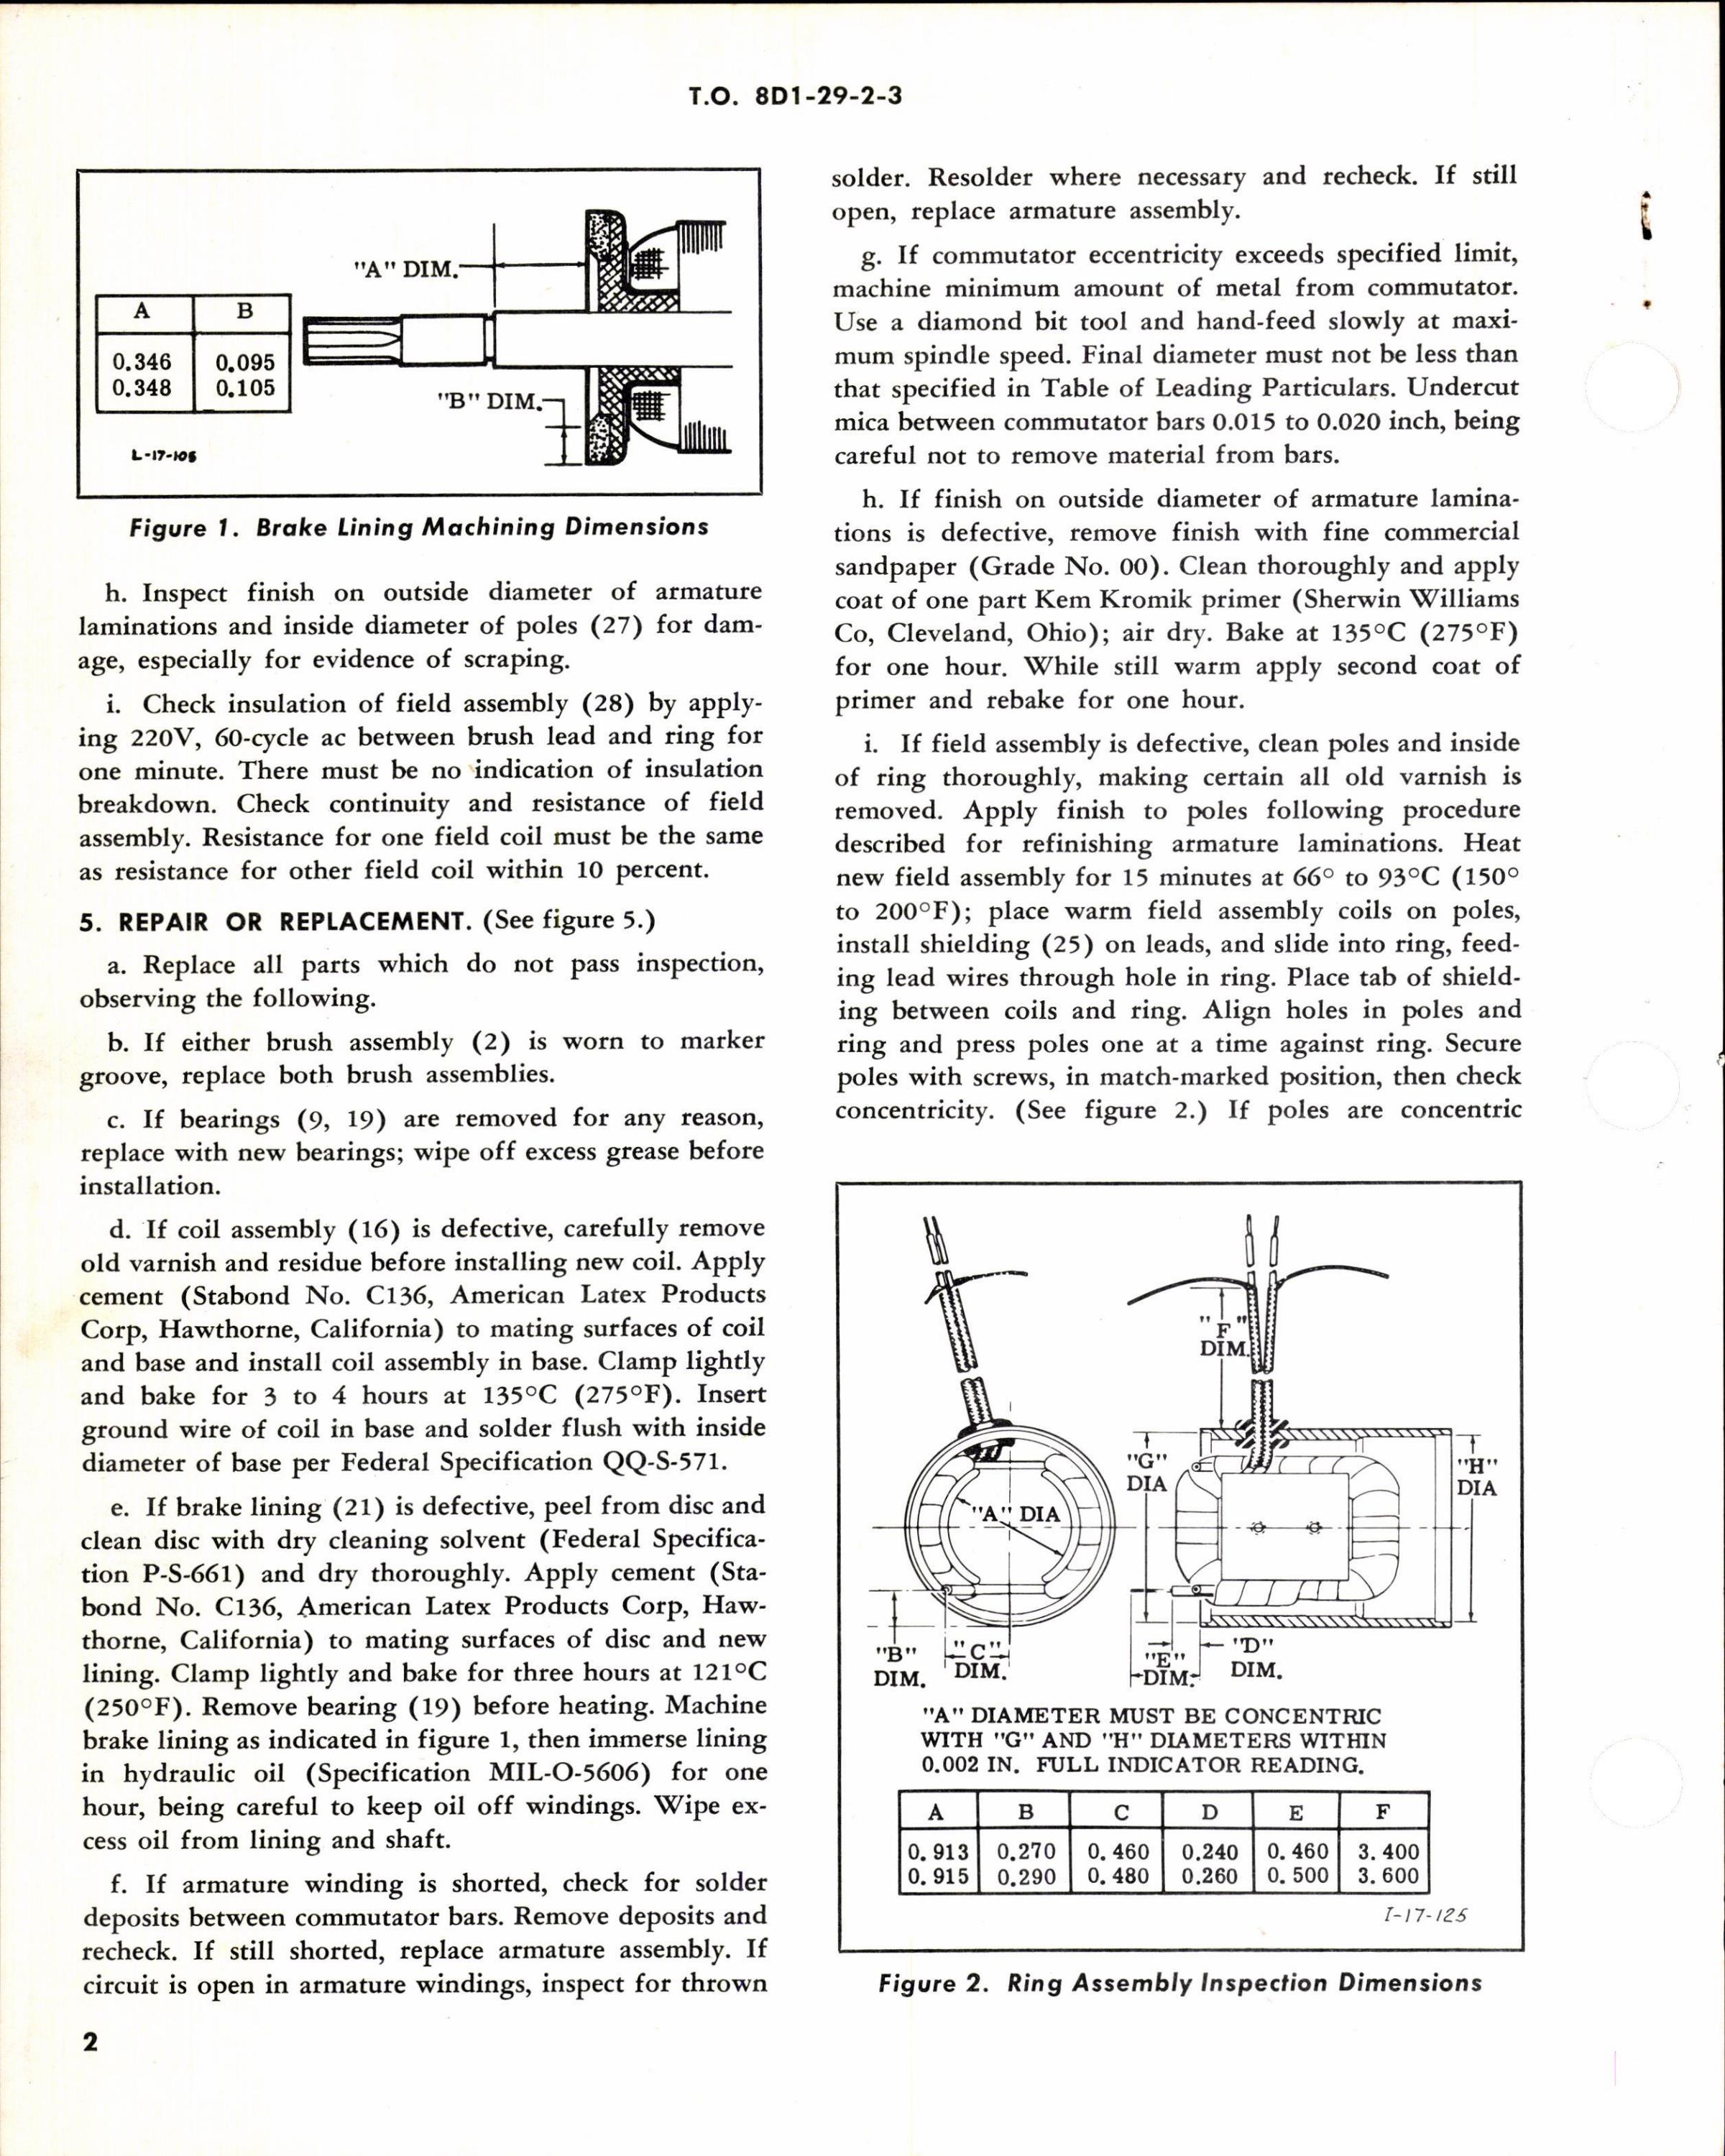 Sample page 2 from AirCorps Library document: Overhaul Instructions with Parts Breakdown for Direct Current Motor Model DCM15-52, Part No 26976